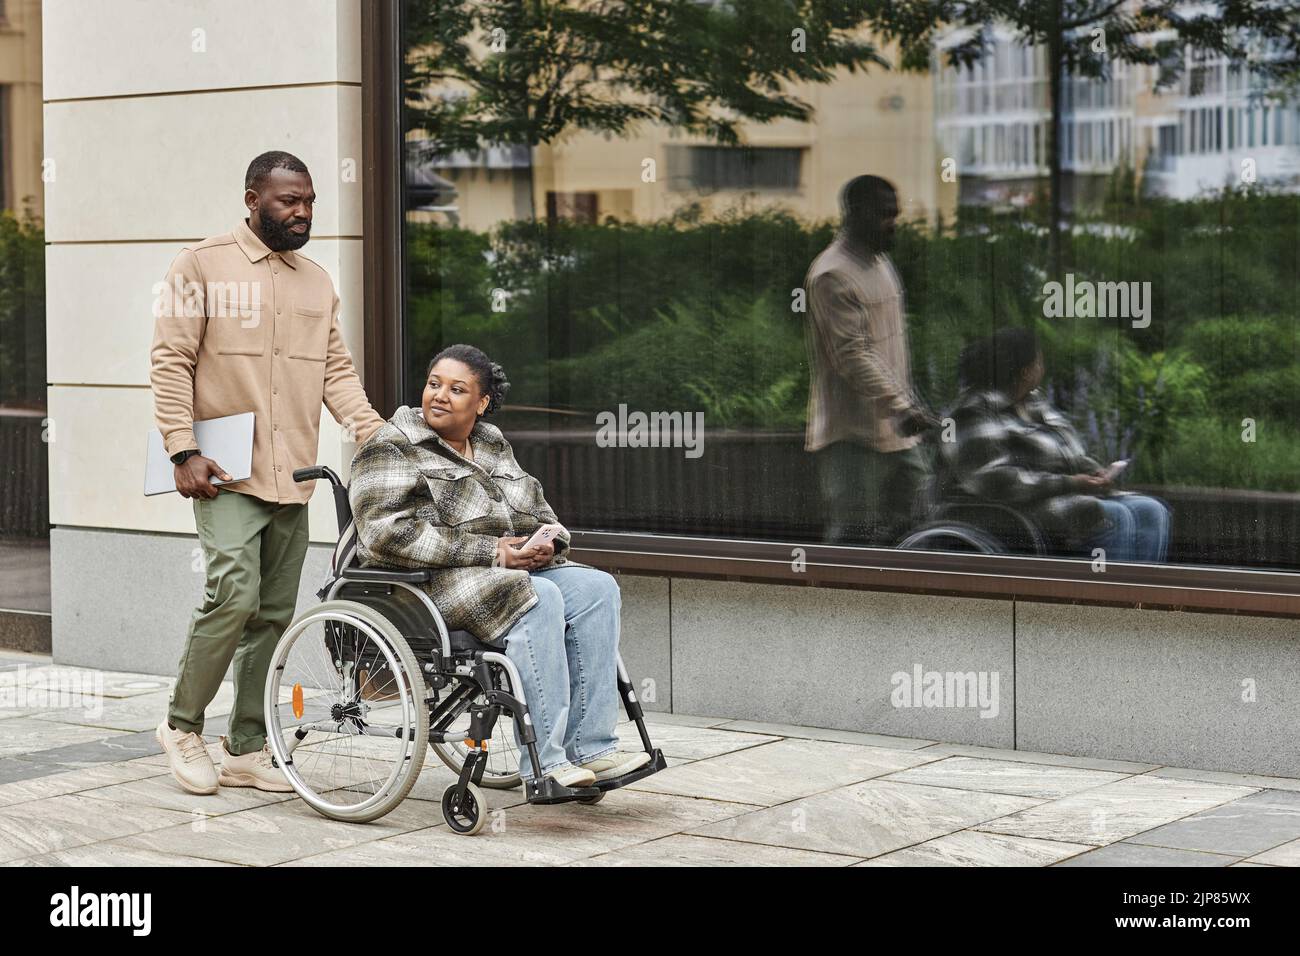 Full length portrait of modern black couple with partner in wheelchair outdoors in city setting, copy space Stock Photo